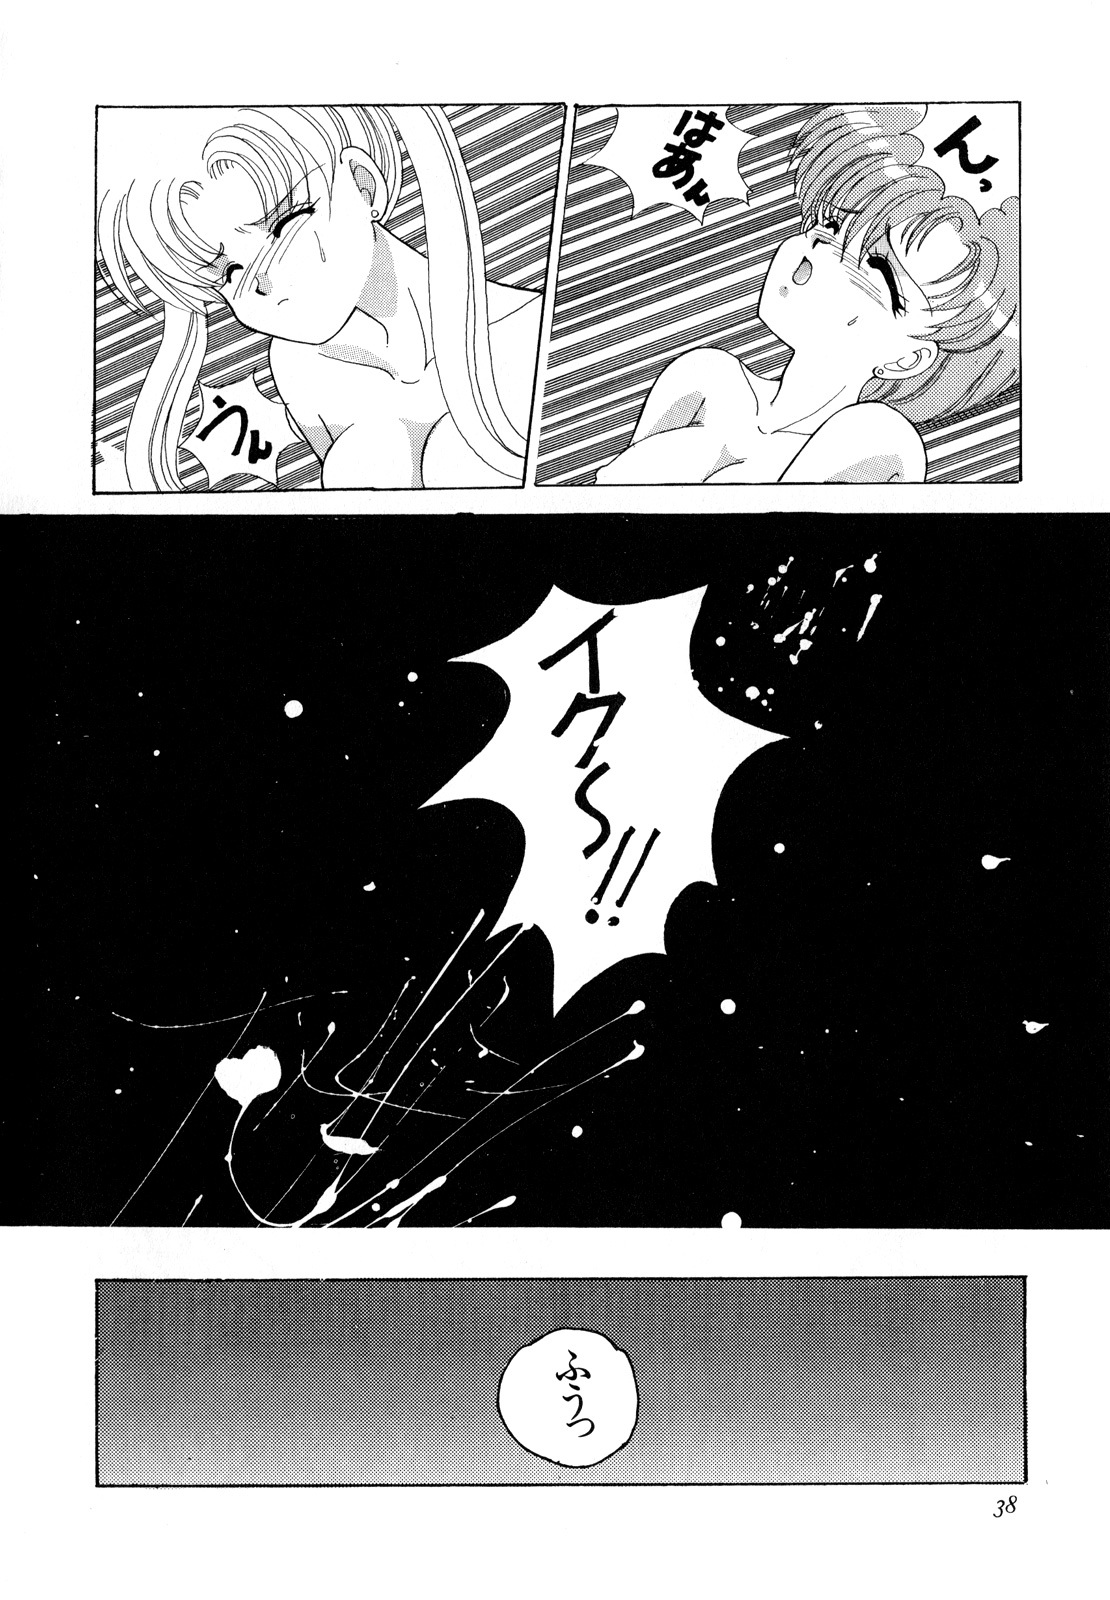 [Anthology] Lunatic Party 3 (Sailor Moon) page 39 full